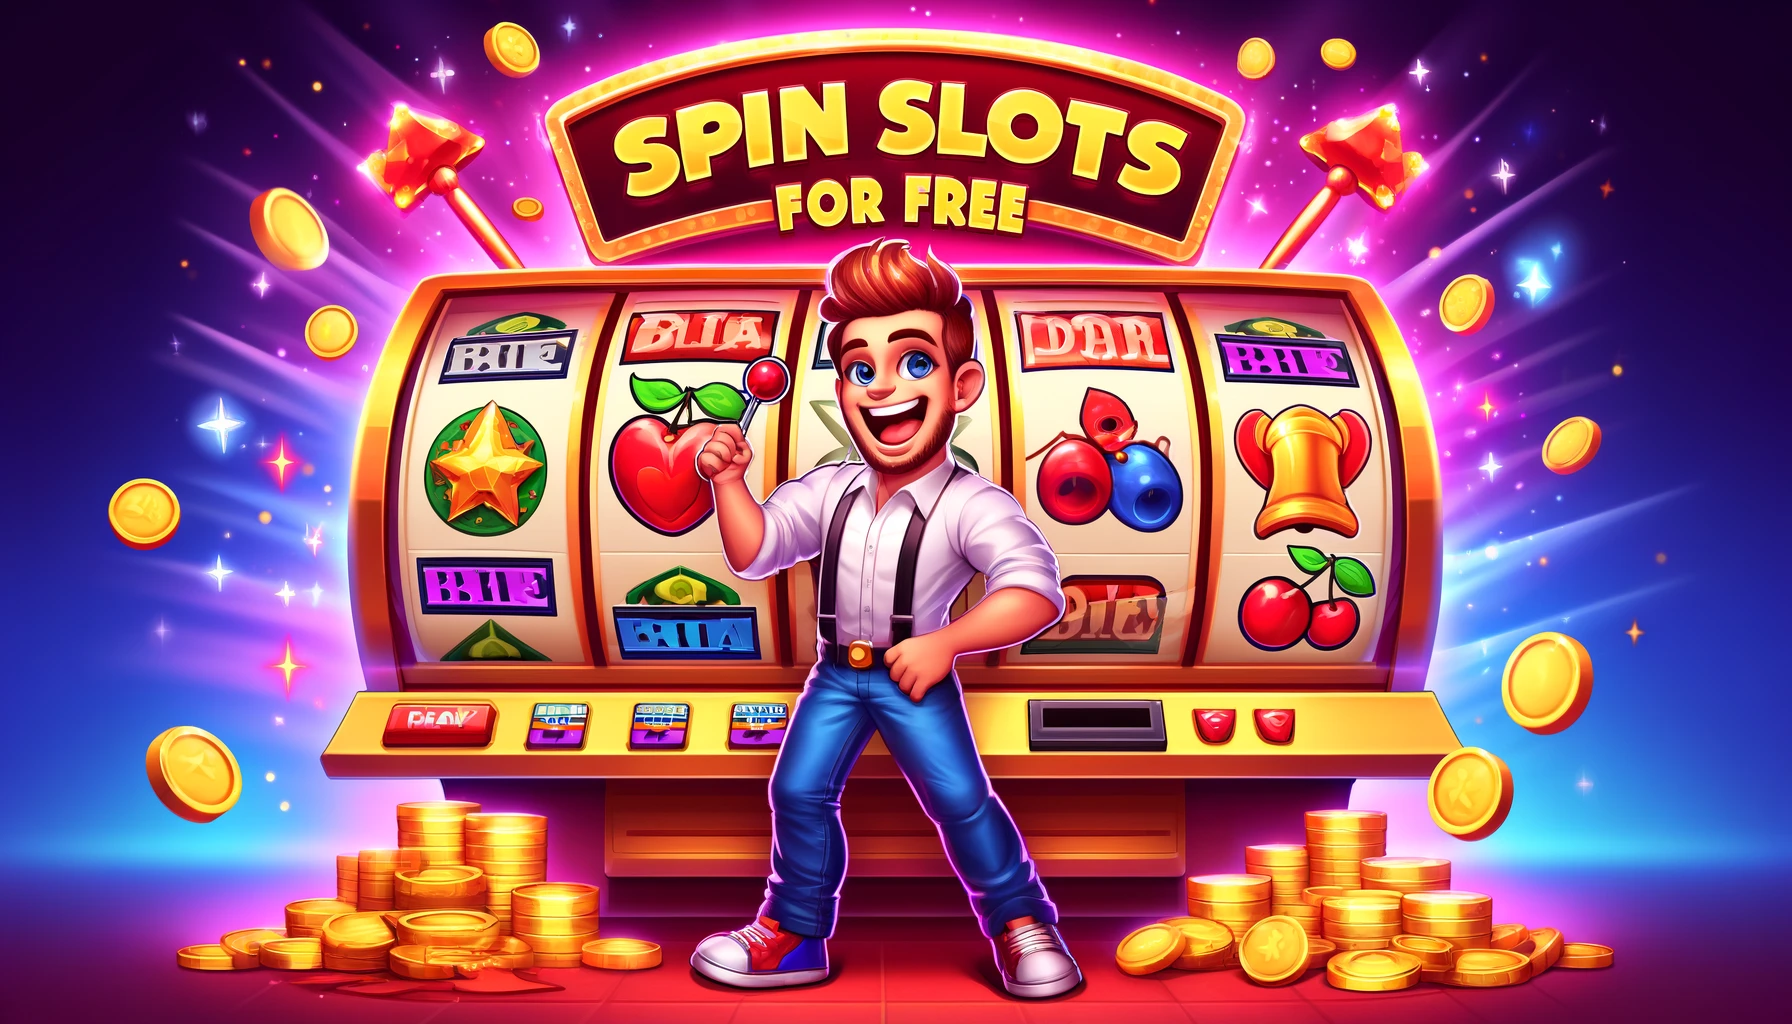 Spin slots for free